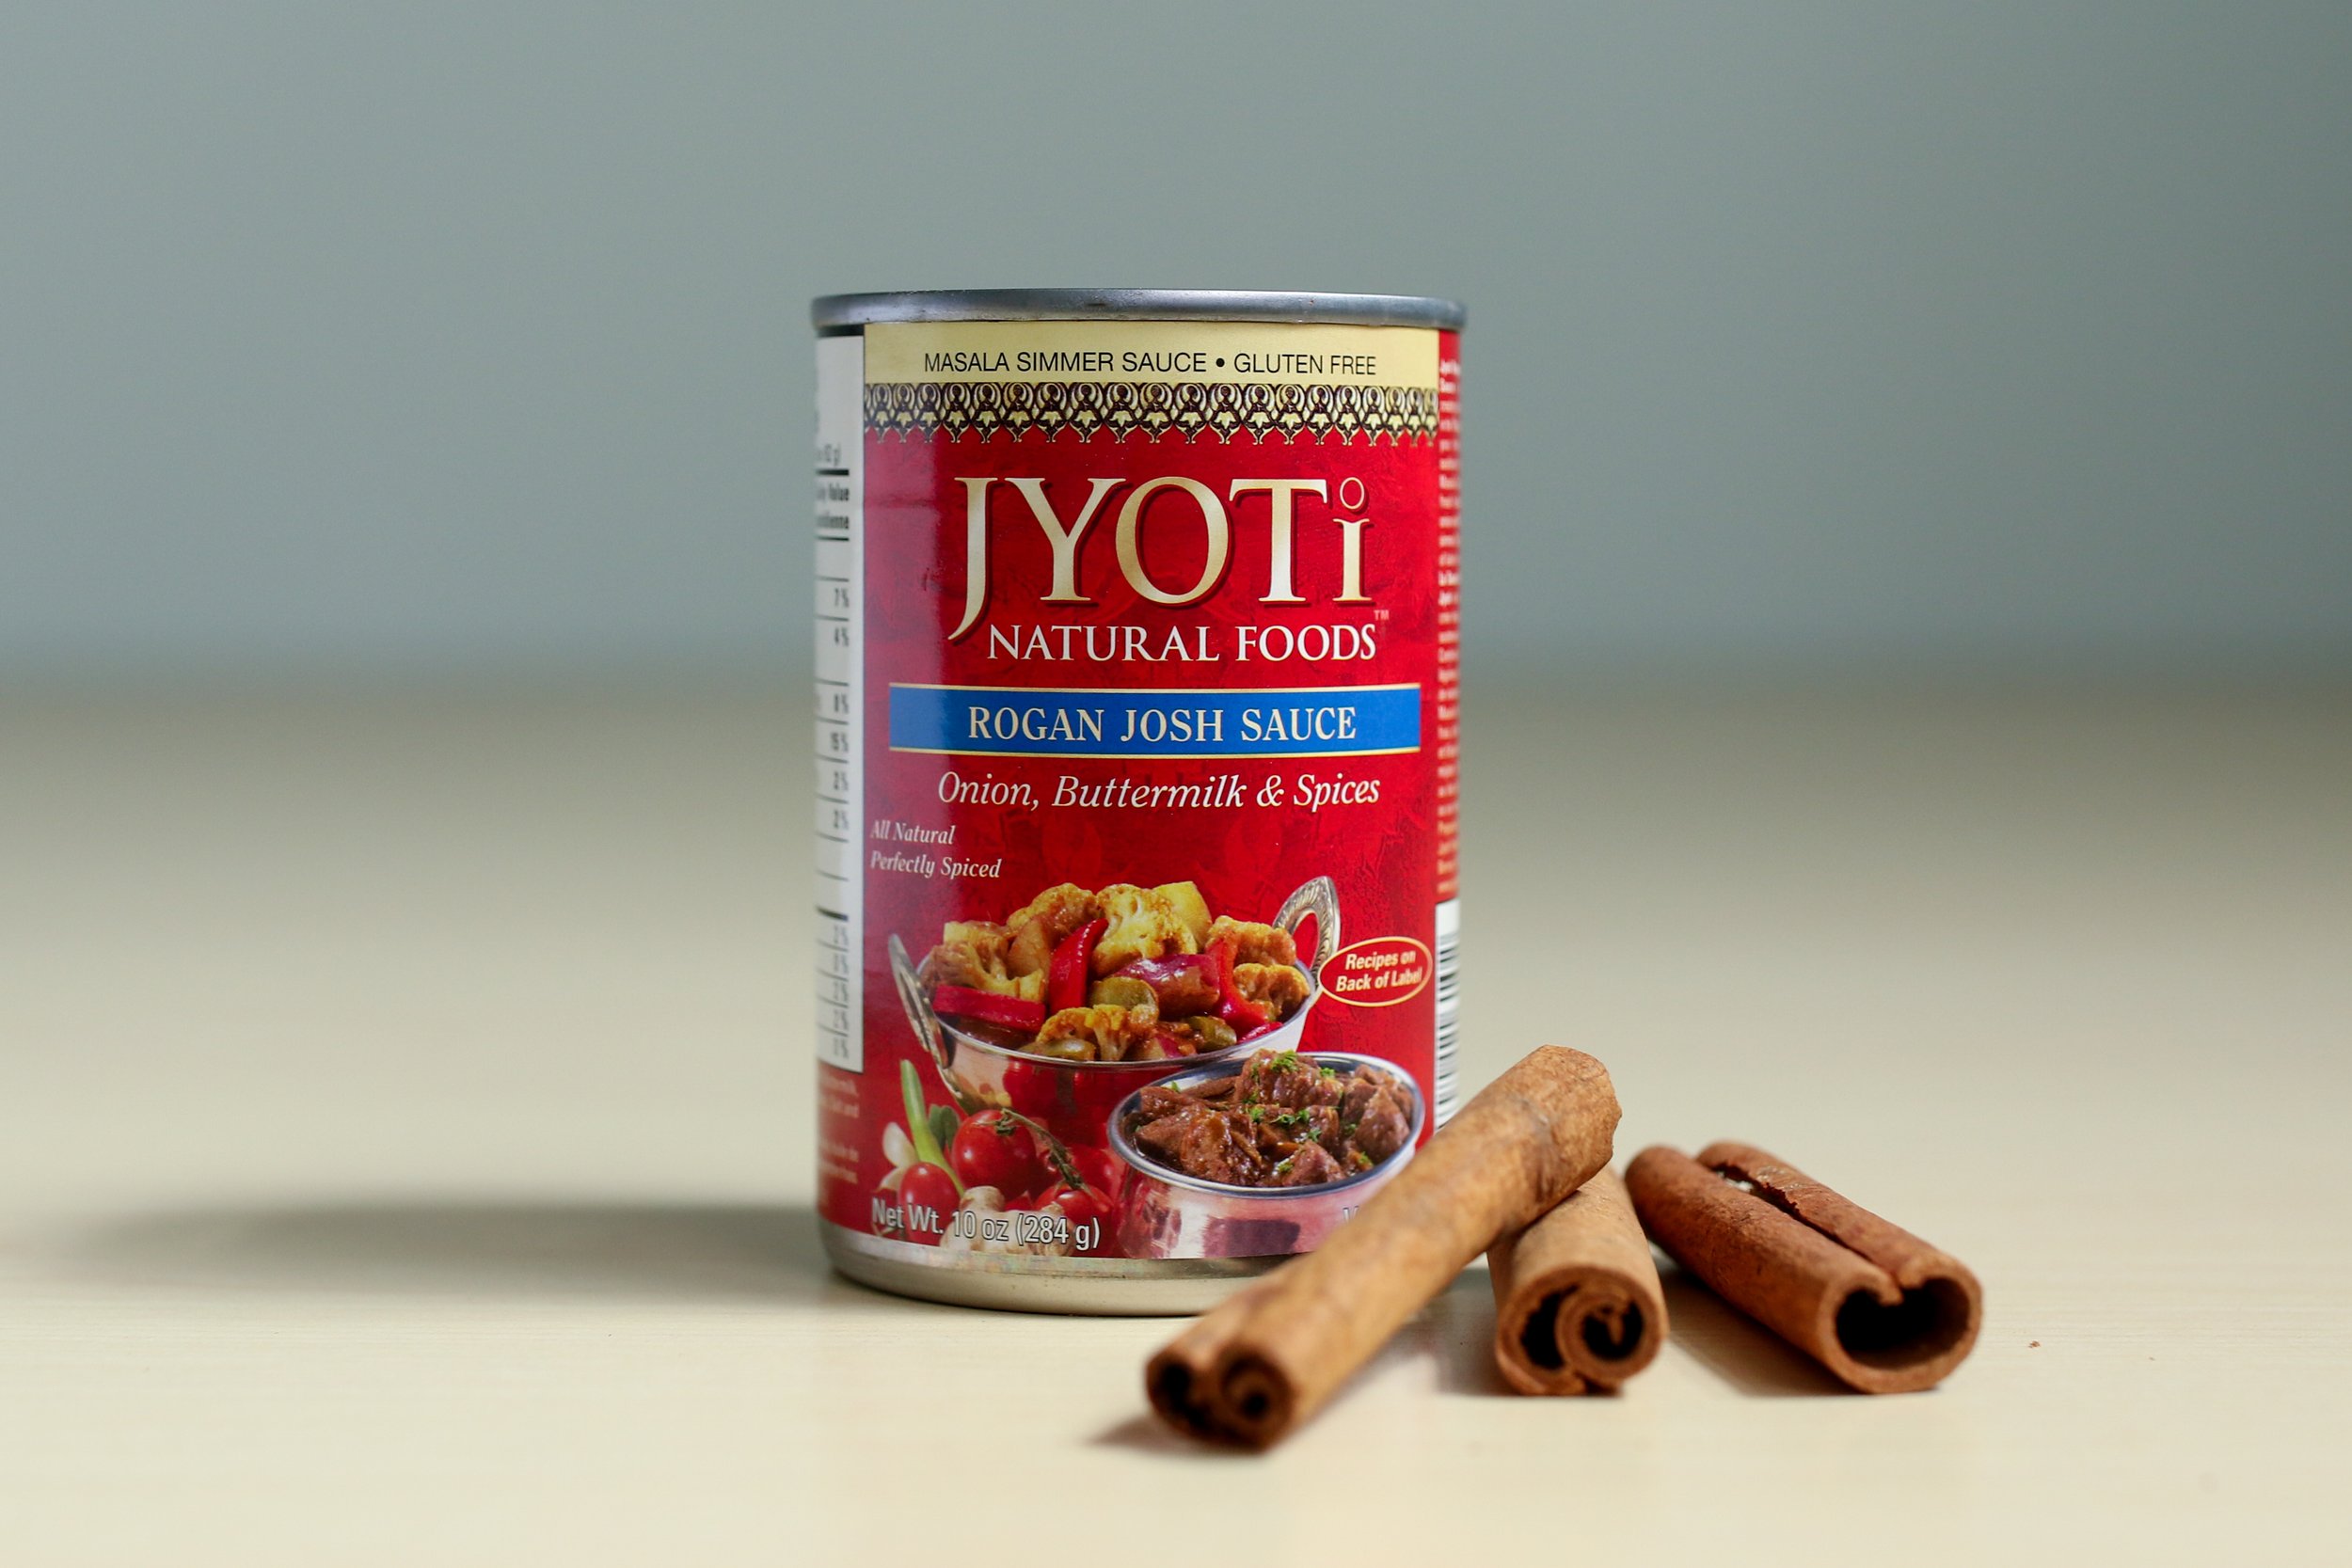 Alt text: a bright red can of indian sauce reads “jyoti natural foods rogan josh sauce” with three sticks of cinnamon lean against its side.